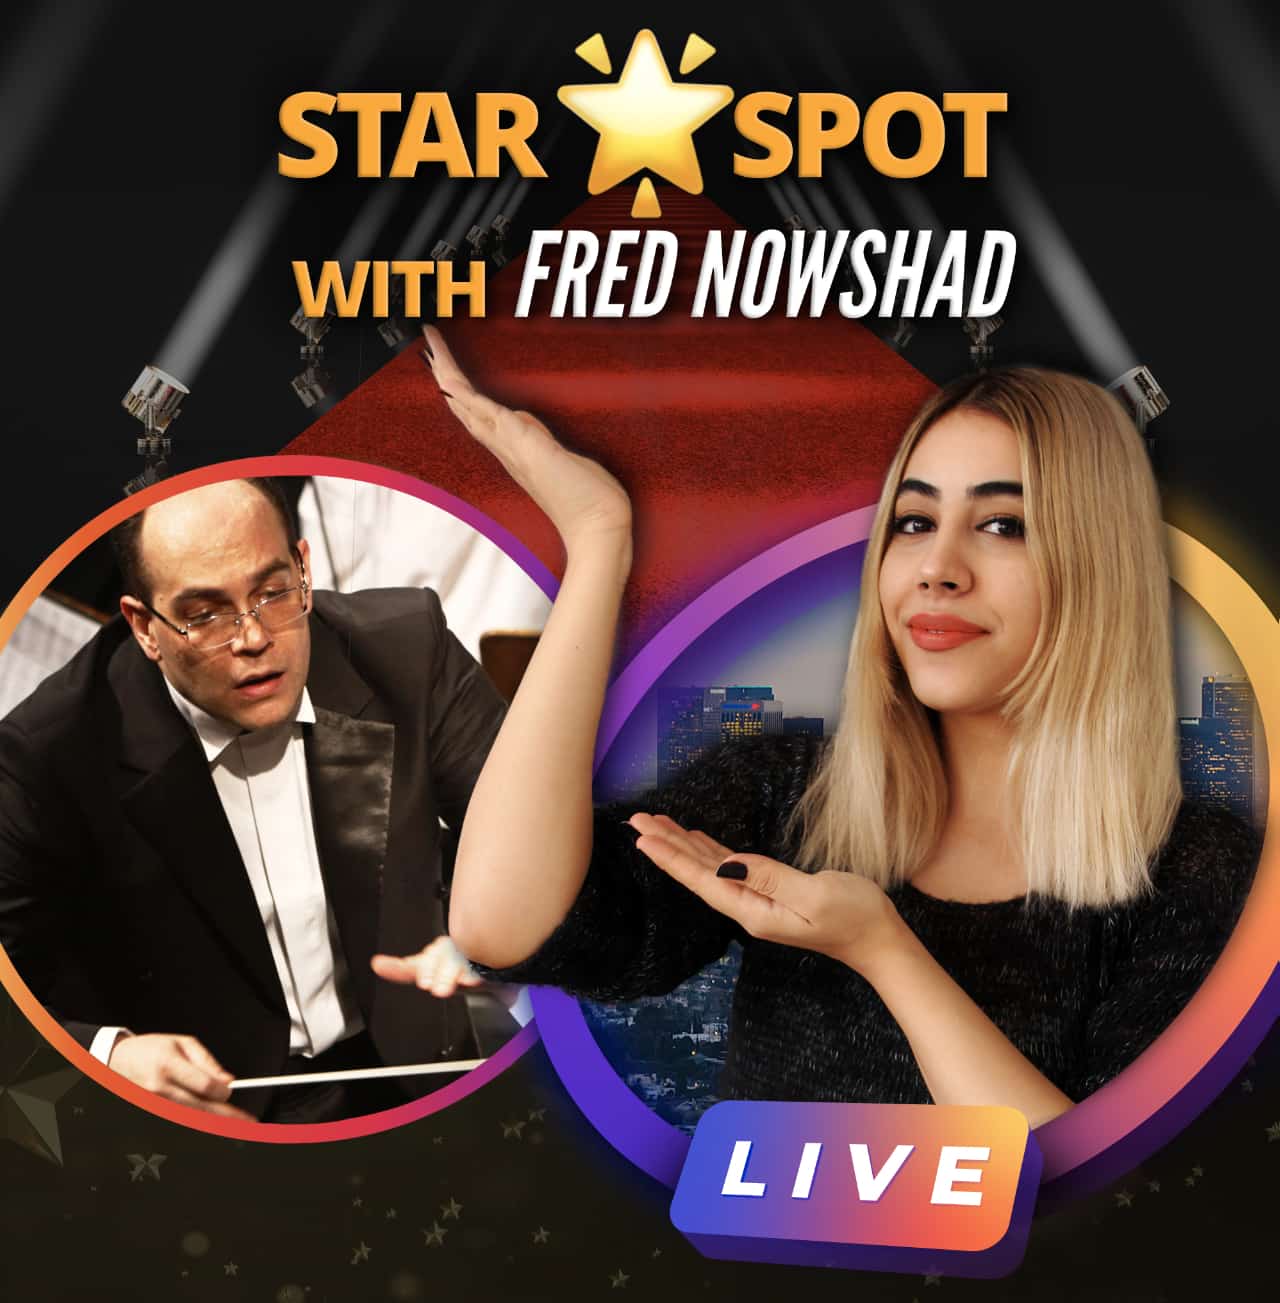 Promotional cover art of Star Spot with Fred Nowshad